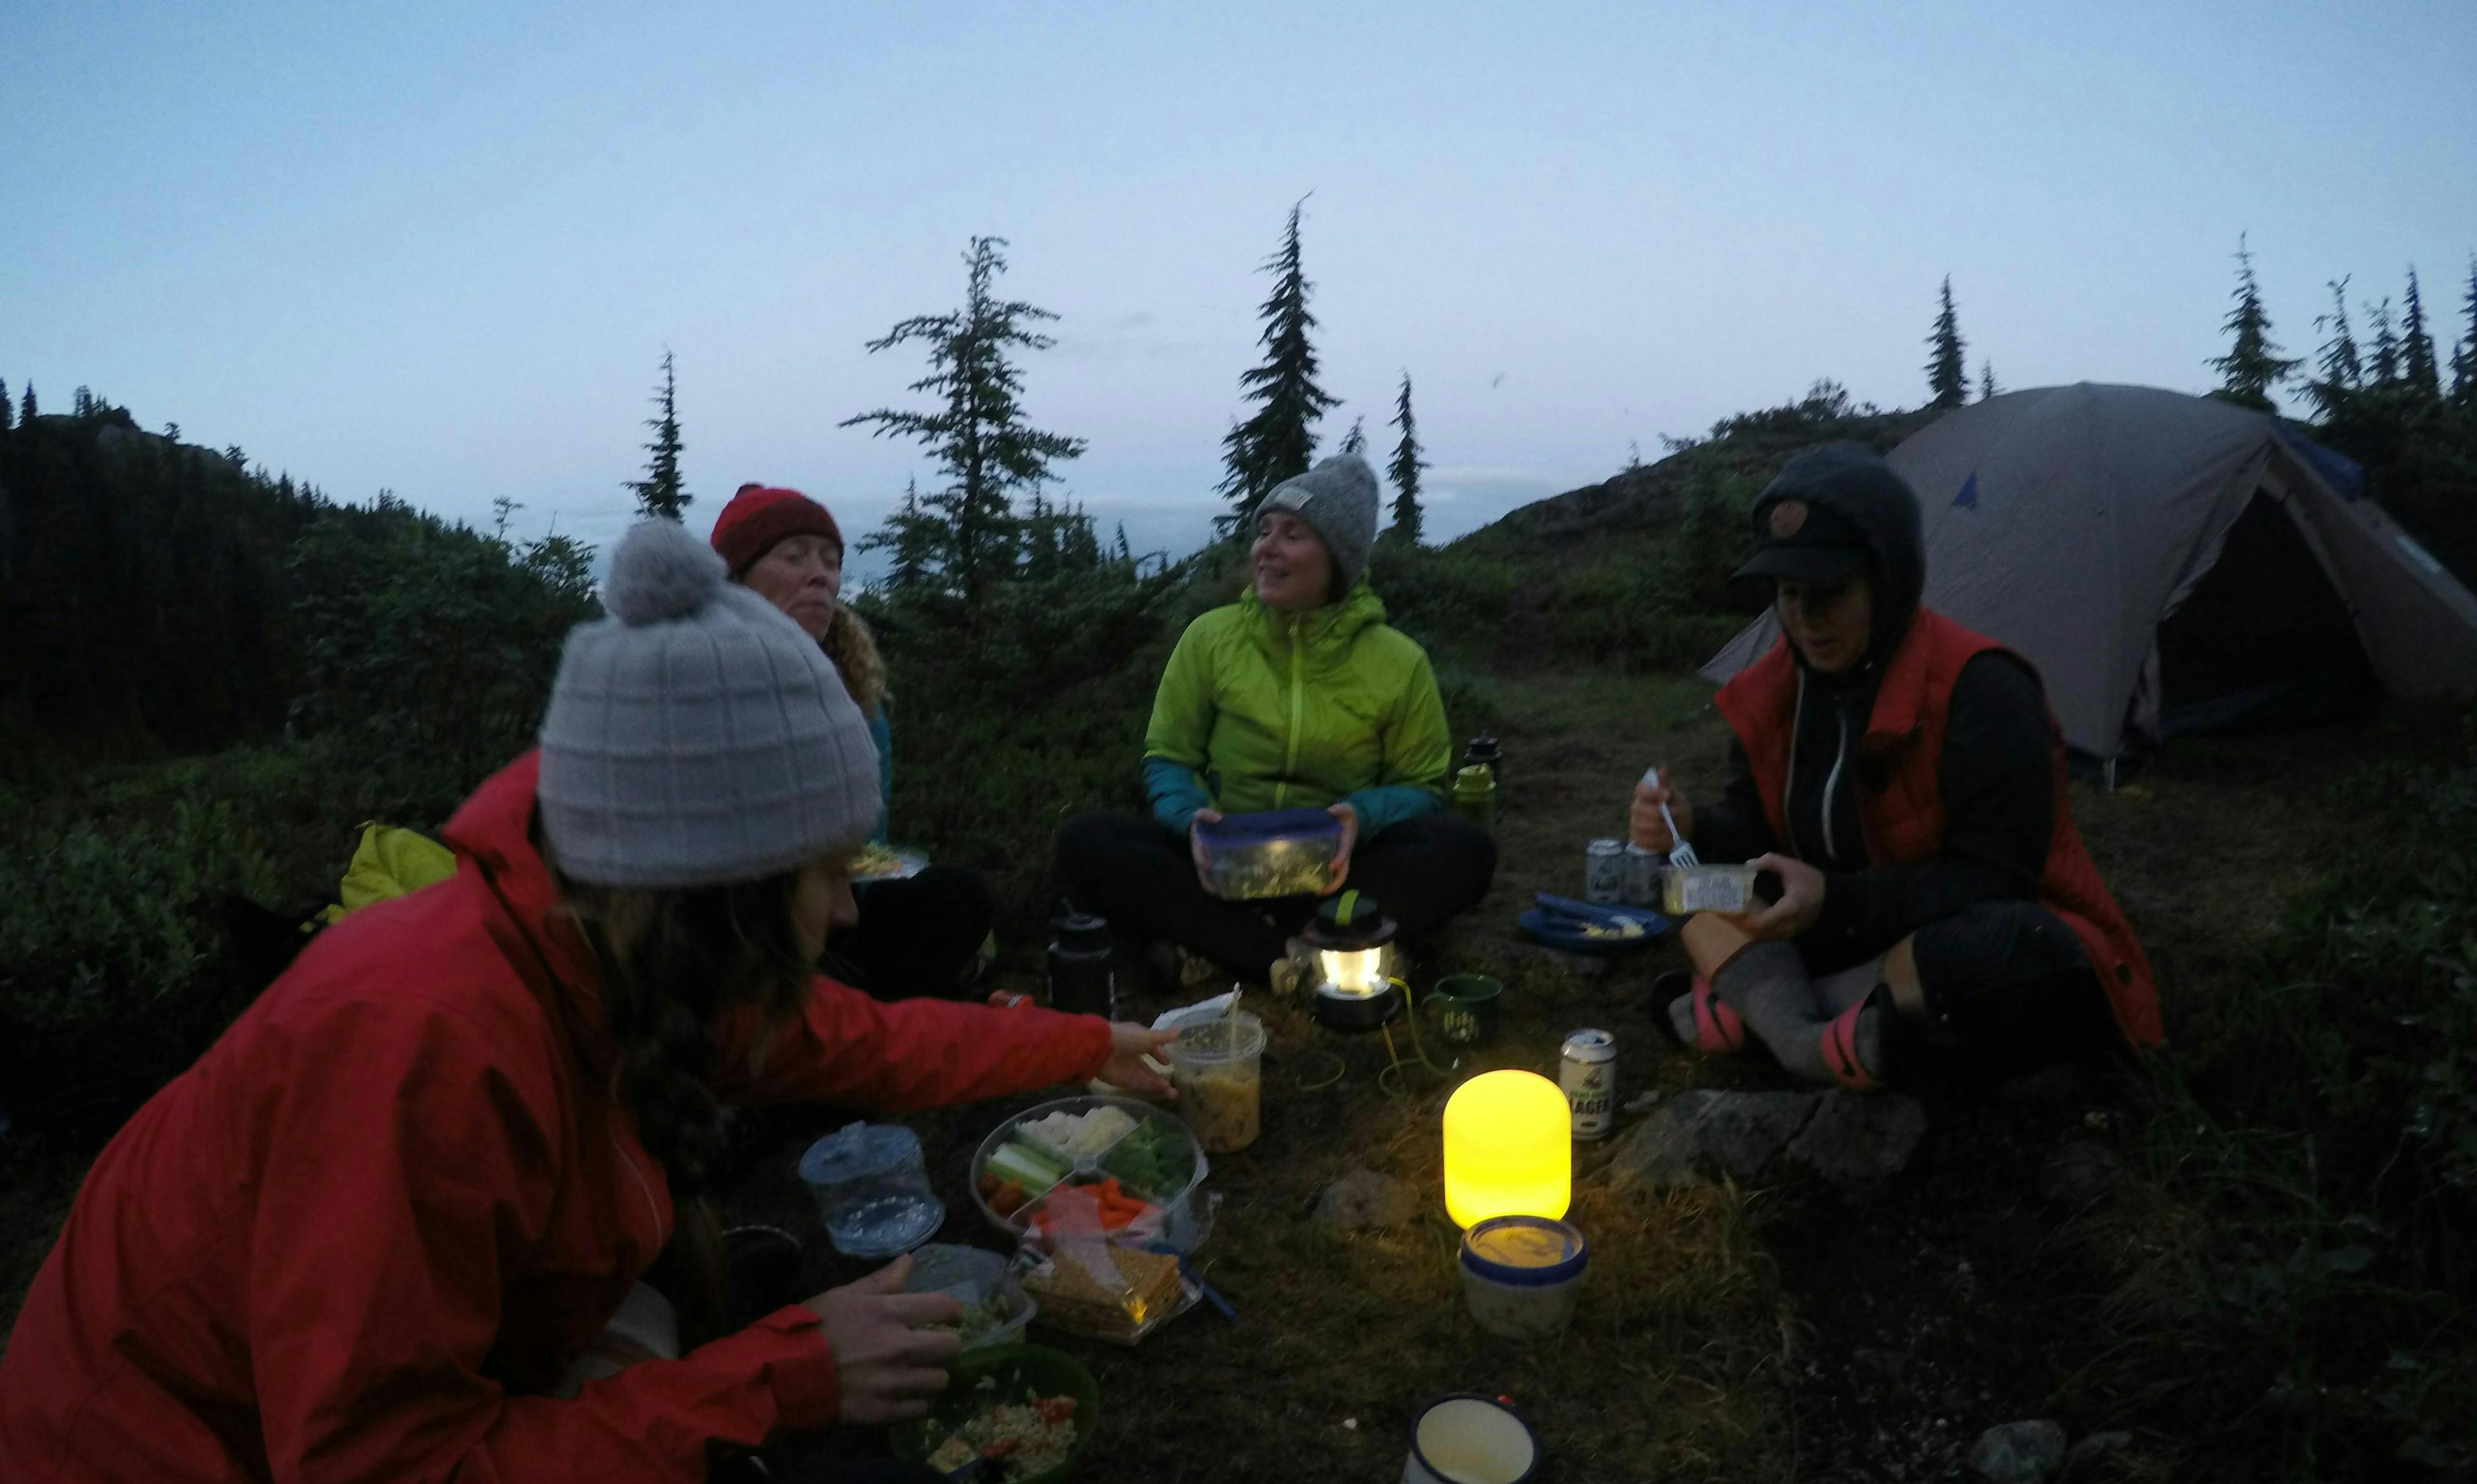 Wednesday night camp out: 7 items worth the weight